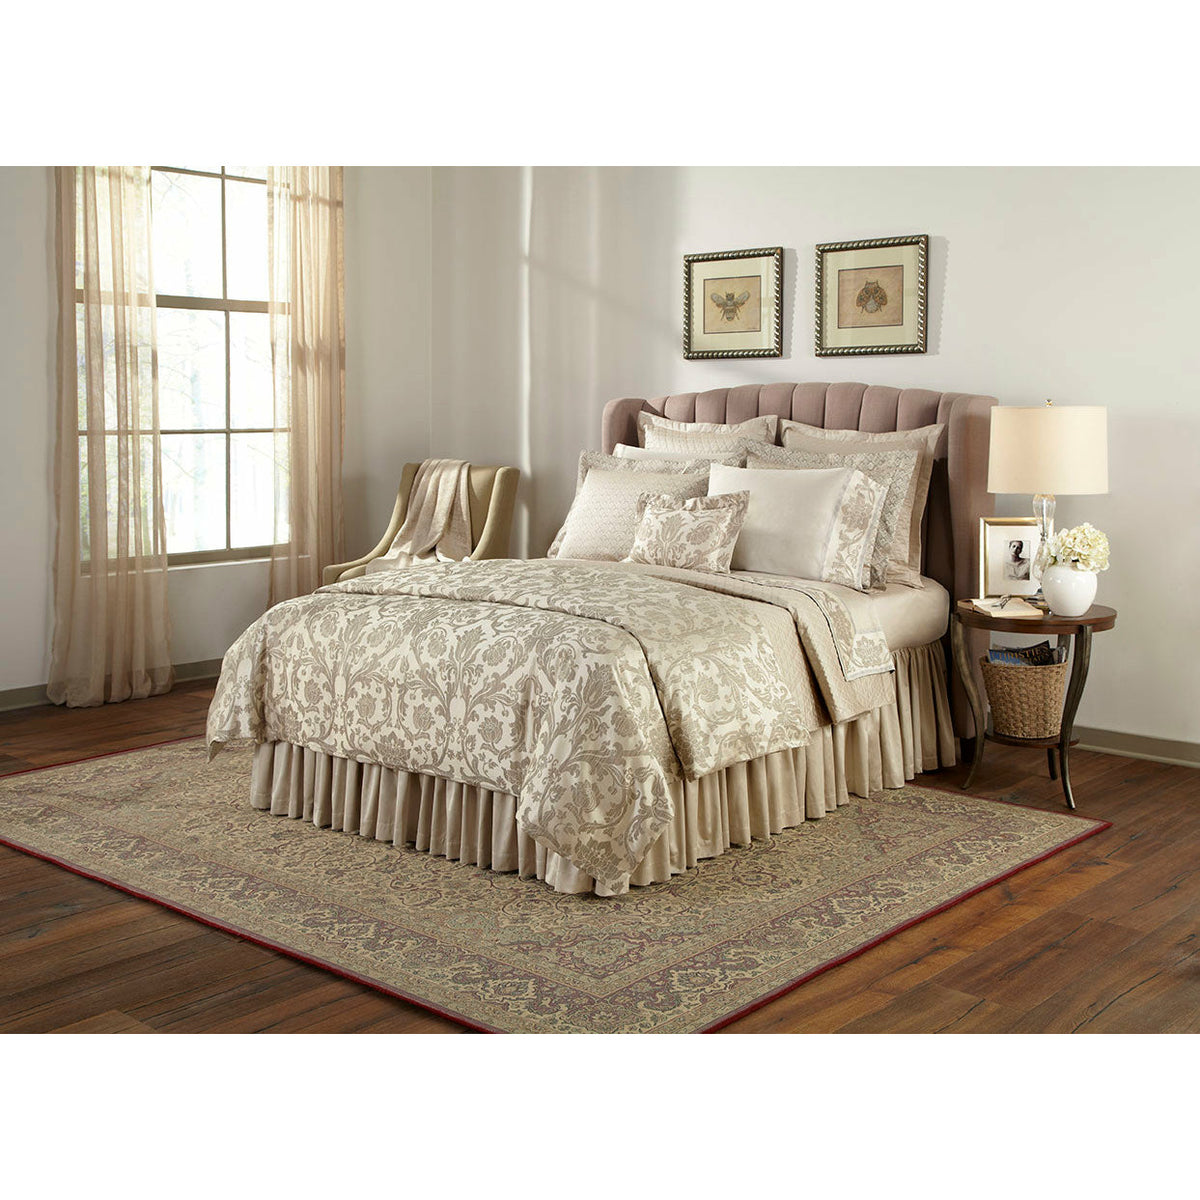 Home Treasures Anastasia Quilted Bedding Fine Linens Full Bed